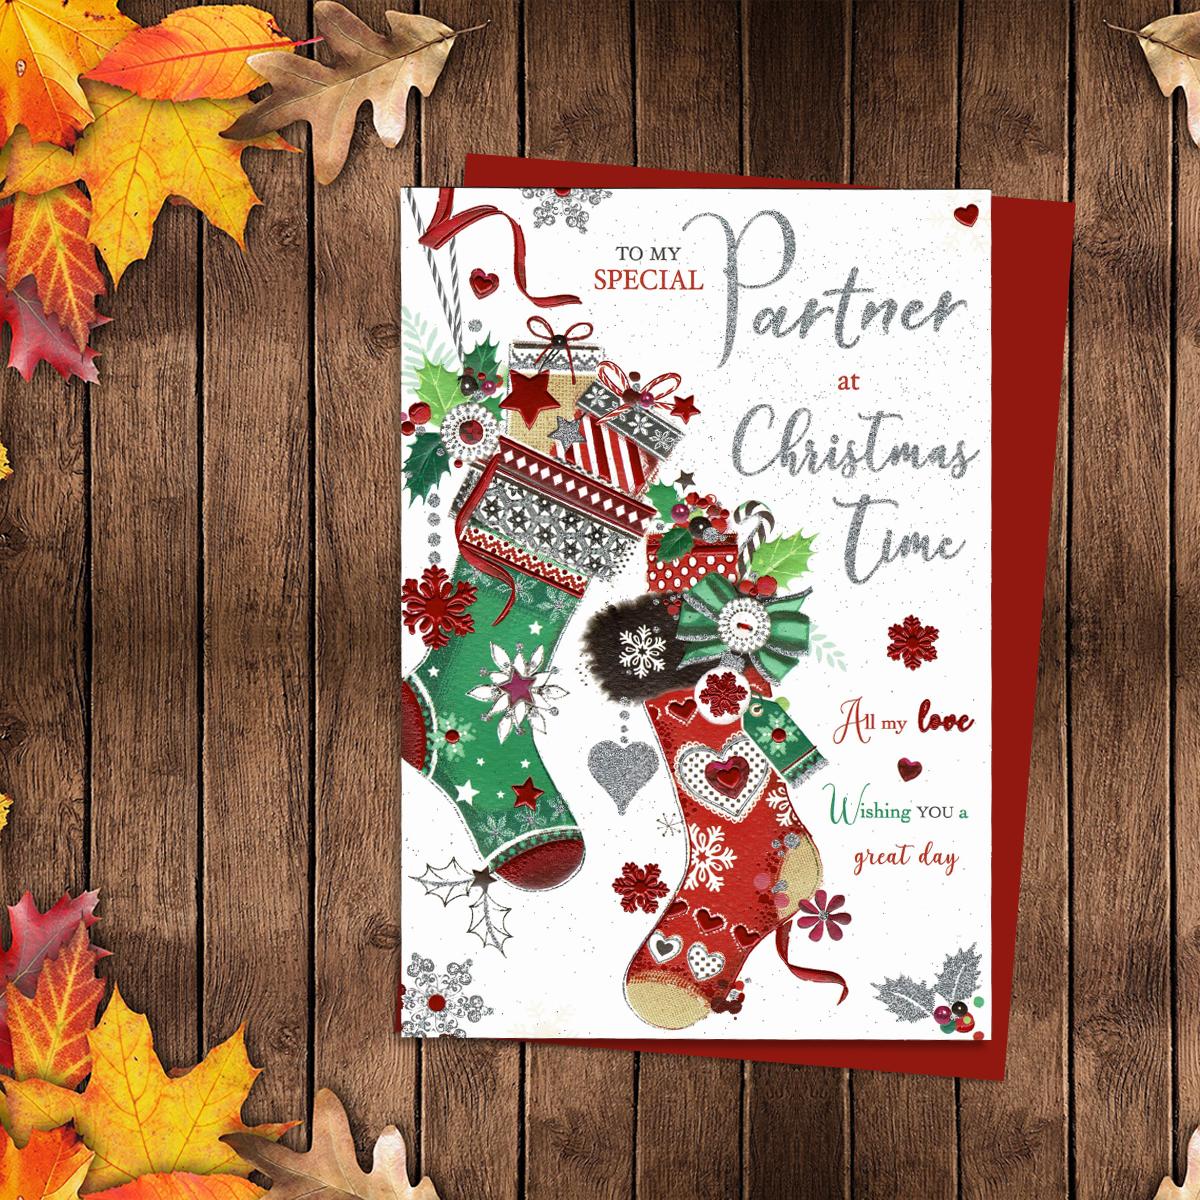 To My Special Partner At Christmas Time Featuring Two Decorated Christmas Stockings. Finished With Silver Glitter detail And Red Envelope